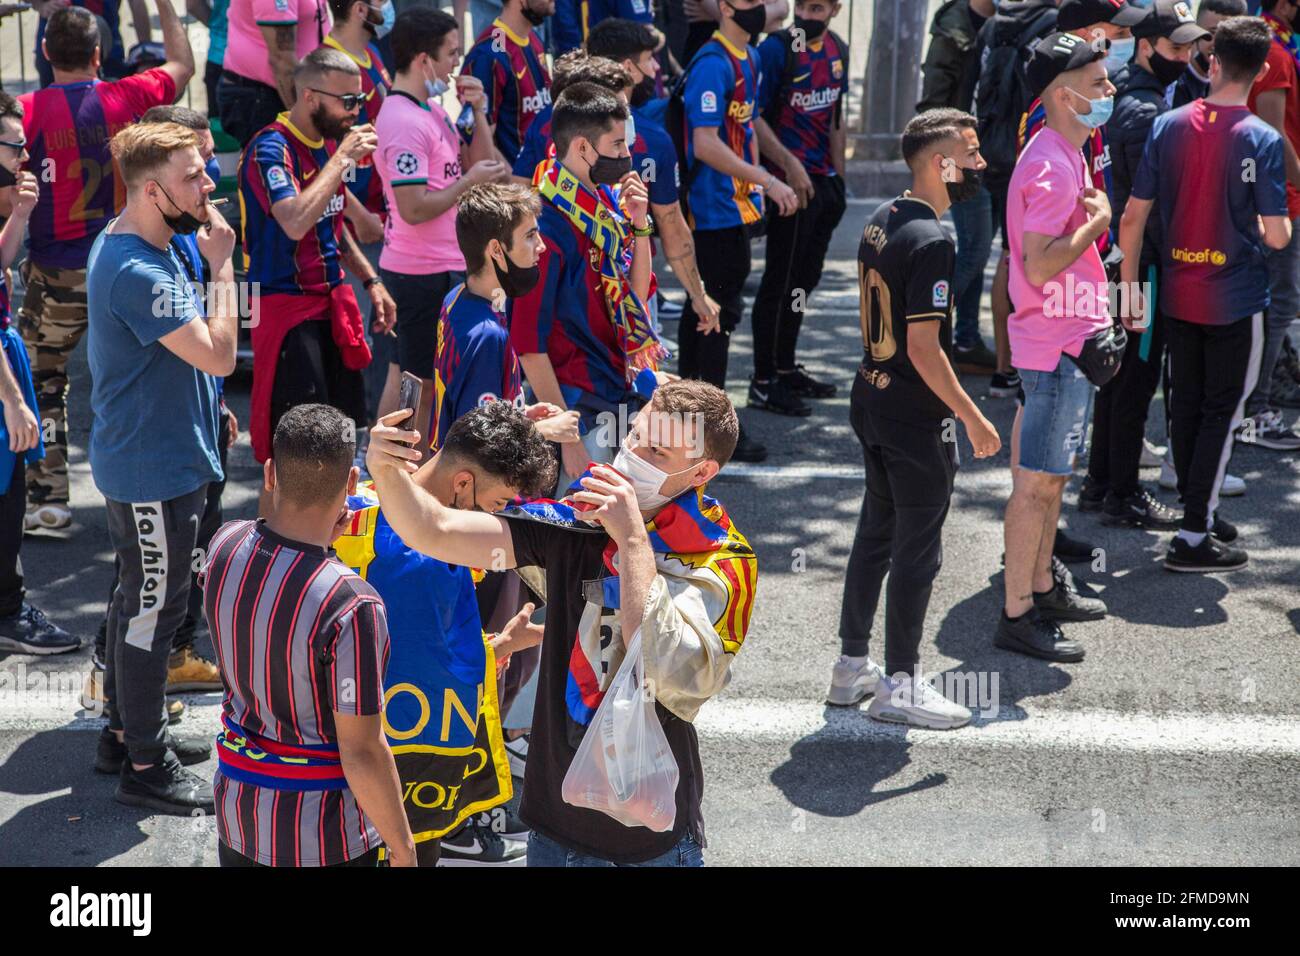 Barcelona, Spain. 08th May, 2021. Football Club Barcelona fan takes a selfie. The ultras supporter group of Football Club Barcelona, Boixos Nois (Crazy Boys) have gathered outside the Camp Nou stadium to motivate the team before the match against Club Atletico de Madrid for the 35th round of La Liga, the Spanish football league. Barça's victory will put the team, currently in third place, ahead of Atletico de Madrid, which occupies the first position. Credit: SOPA Images Limited/Alamy Live News Stock Photo